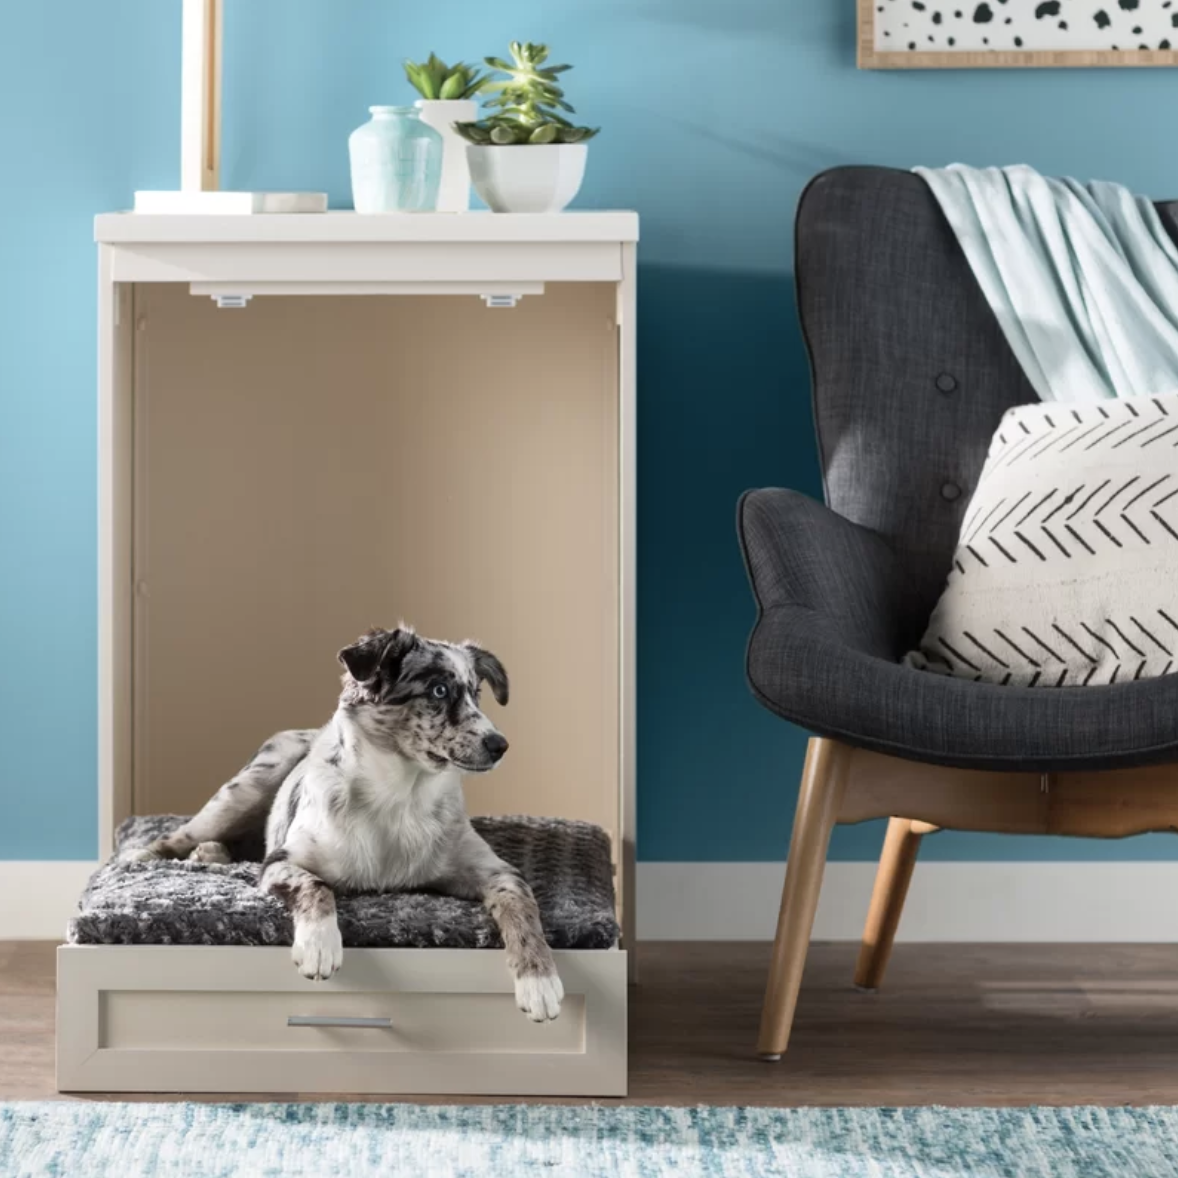 Wayfair Black Friday Deals on The Dapple's List of Best Black Friday Deals for Dog Lovers and Dog Owners